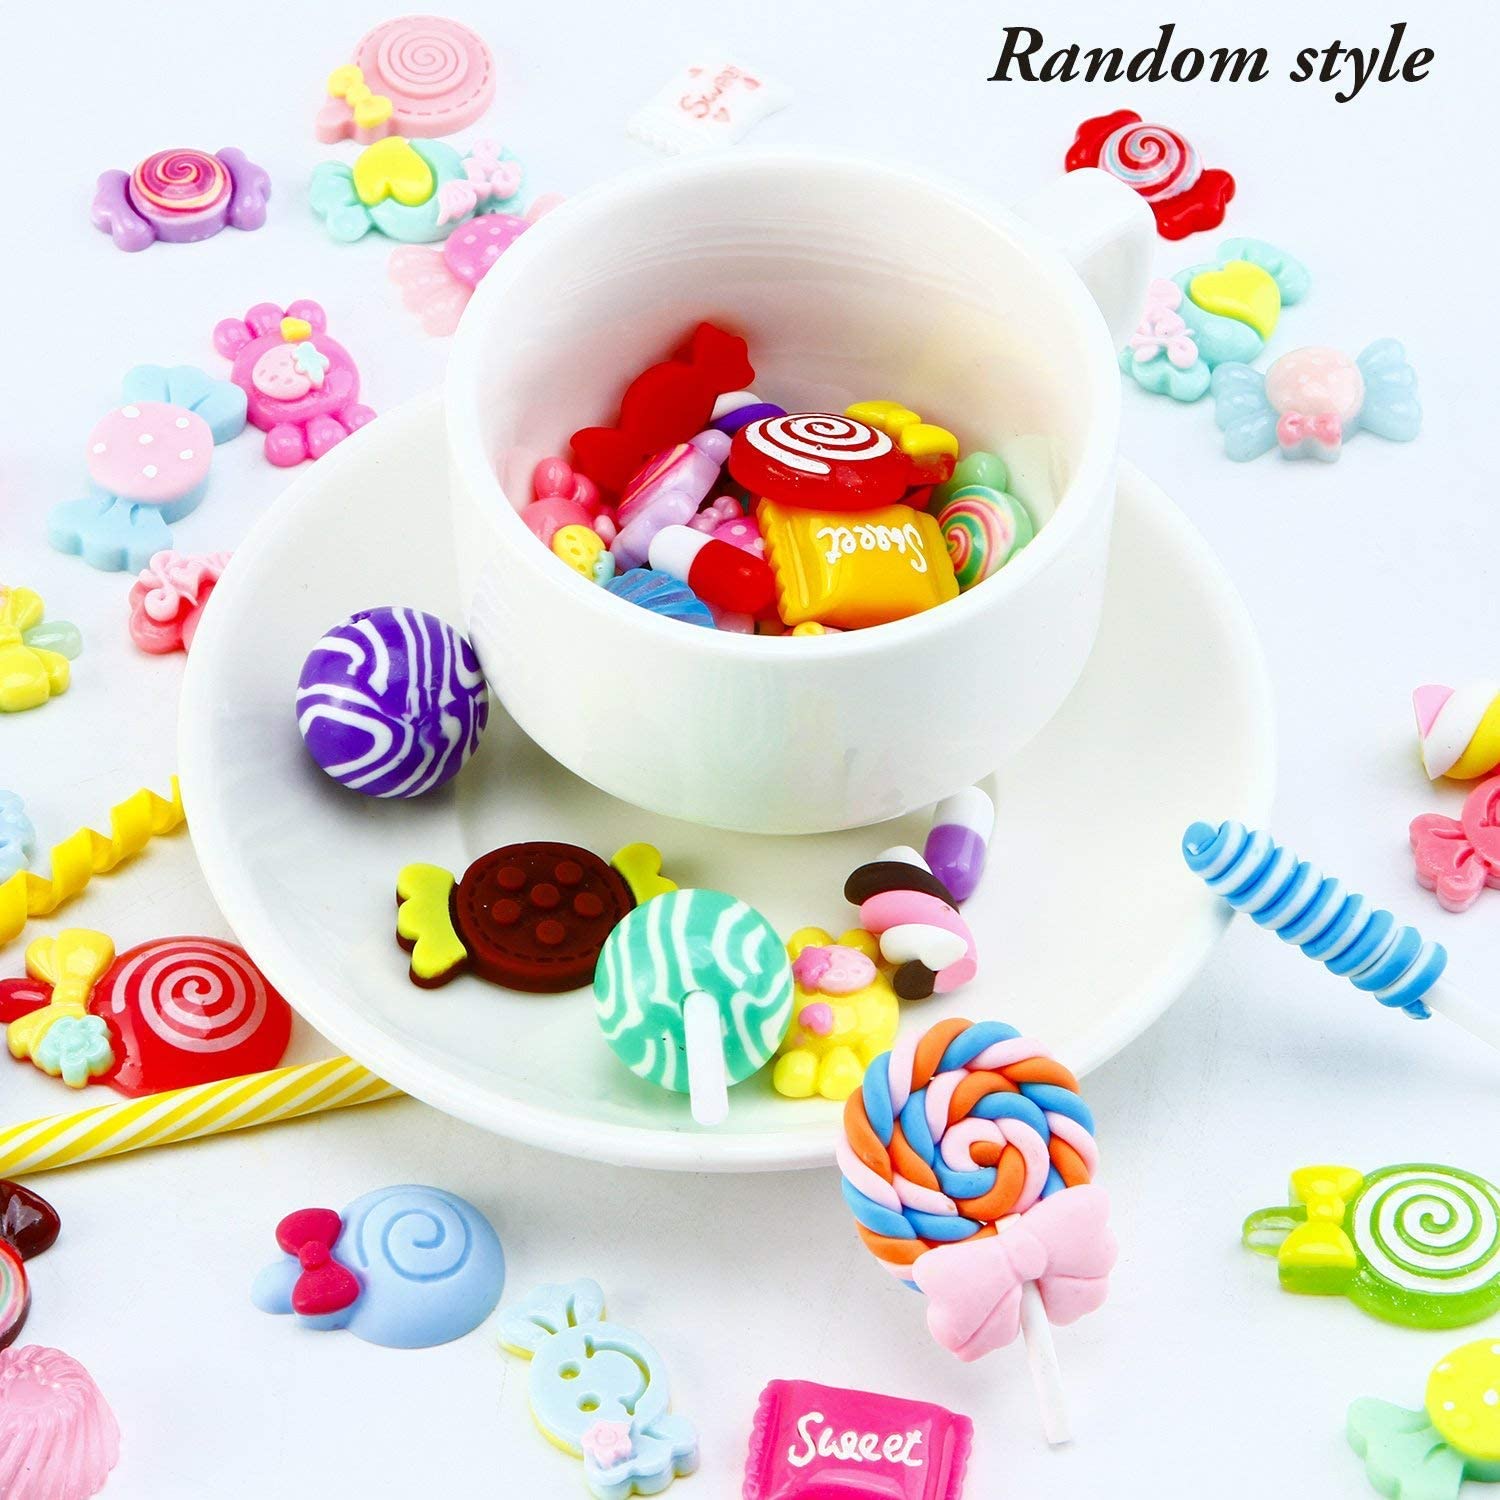 Amerteer Resin Flatback Charms, 60pcs Slime Charms and Containers Mixed Candy Cake Sweets Resin Cabochons for DIY Crafts, Scrapbooking, Jewelry Making Mixed Resin Flatback Slime Beads Making Supplies - image 3 of 8